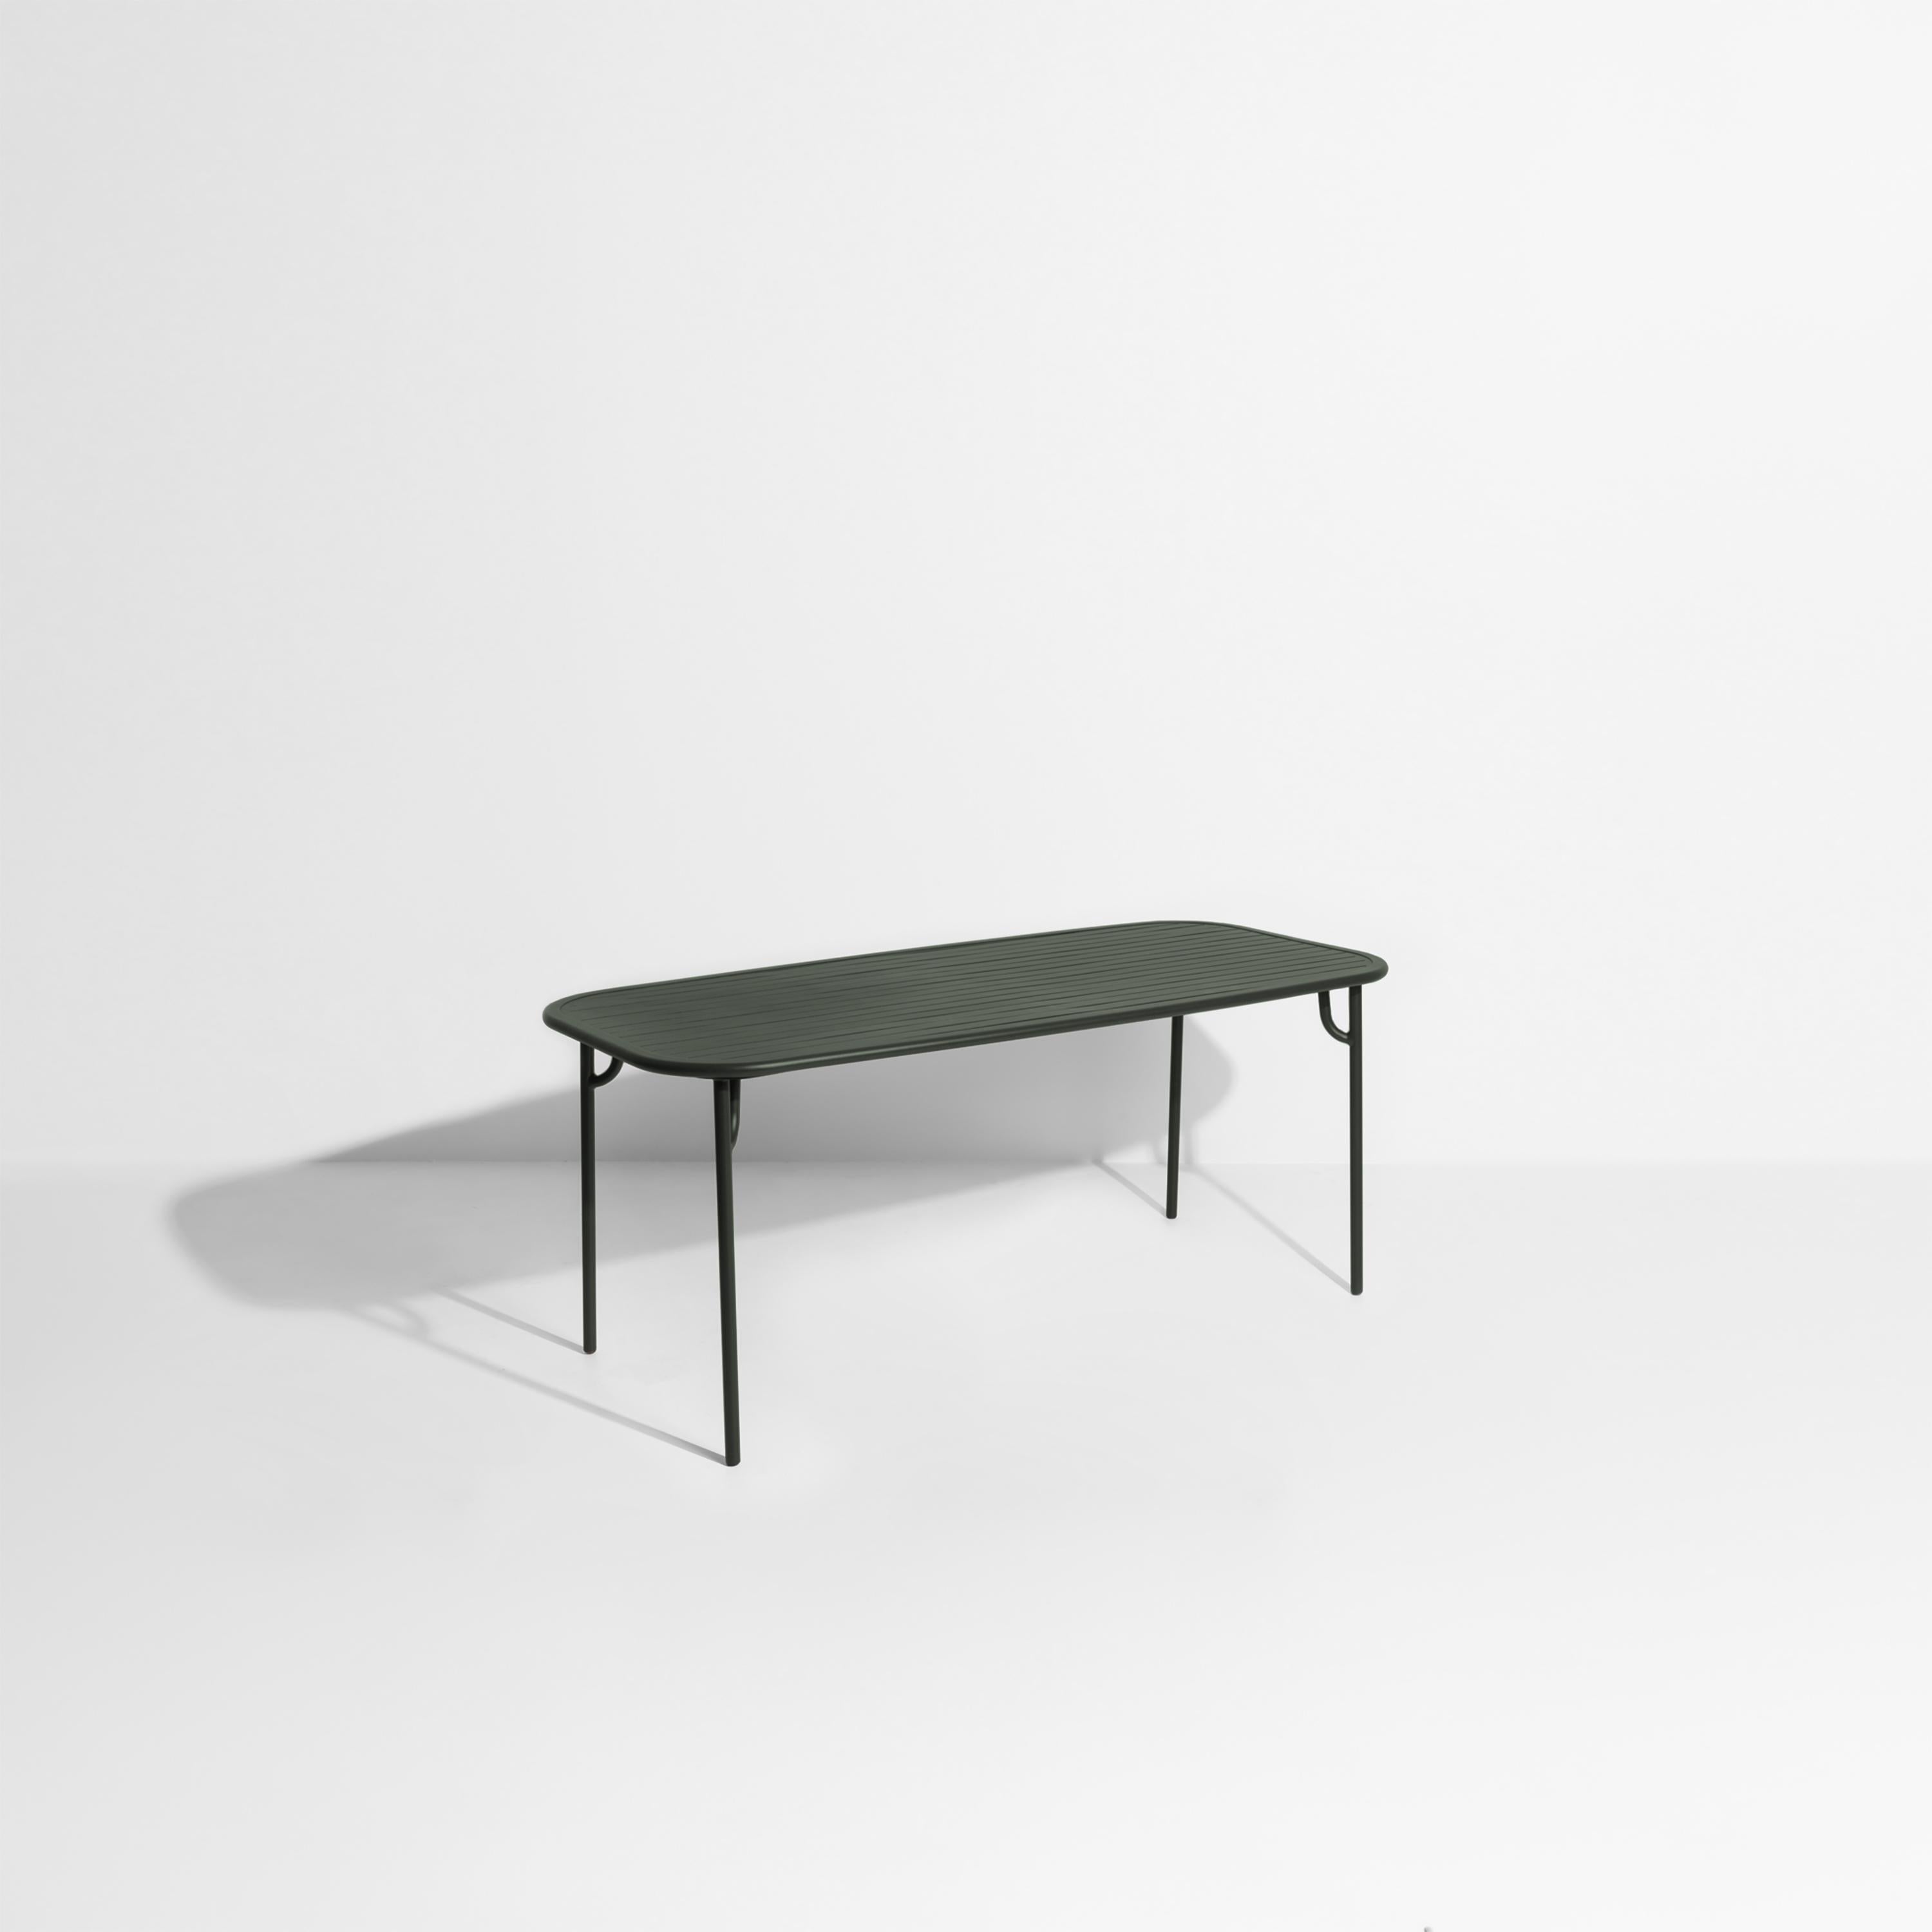 Petite Friture Week-End Medium Rectangular Dining Table in Glass Green Aluminium with Slats by Studio BrichetZiegler, 2017

The week-end collection is a full range of outdoor furniture, in aluminium grained epoxy paint, matt finish, that includes